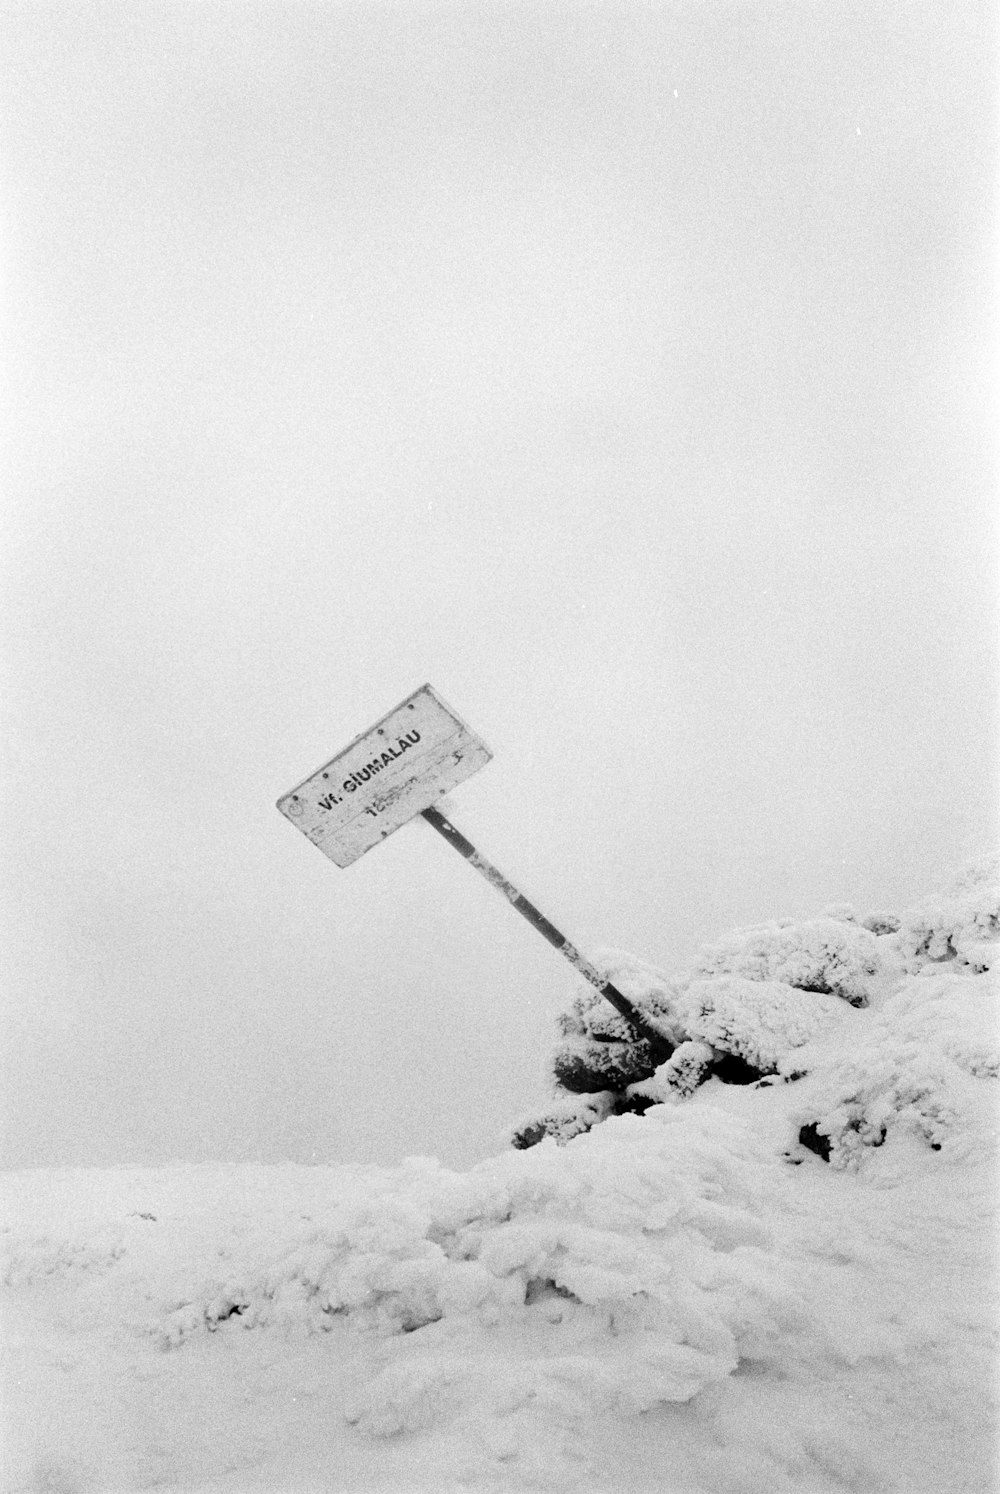 a sign sticking out of the snow covered ground